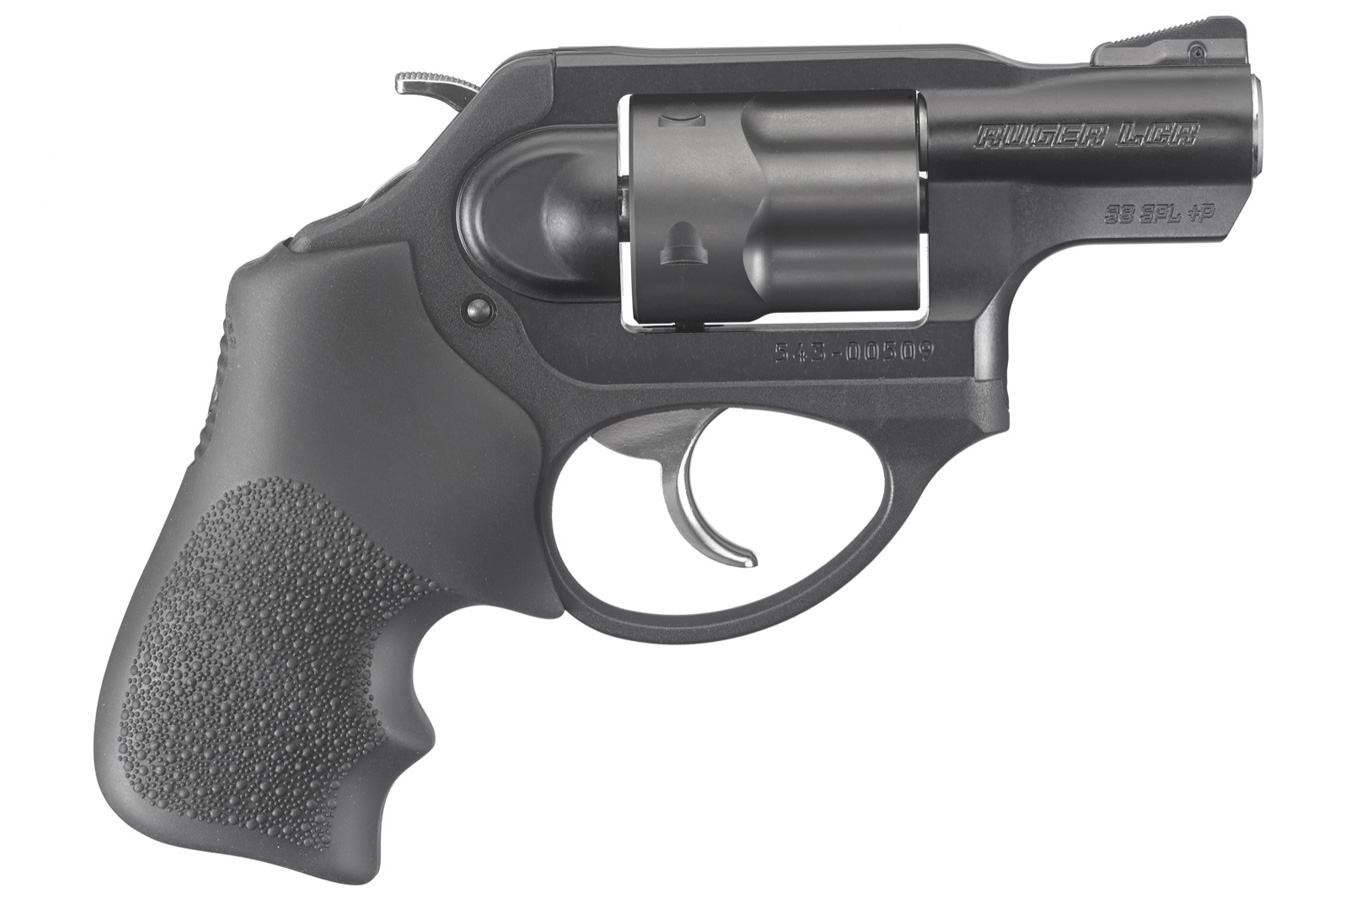 No. 12 Best Selling: RUGER LCR-X 38SPL DOUBLE ACTION REVOLVER